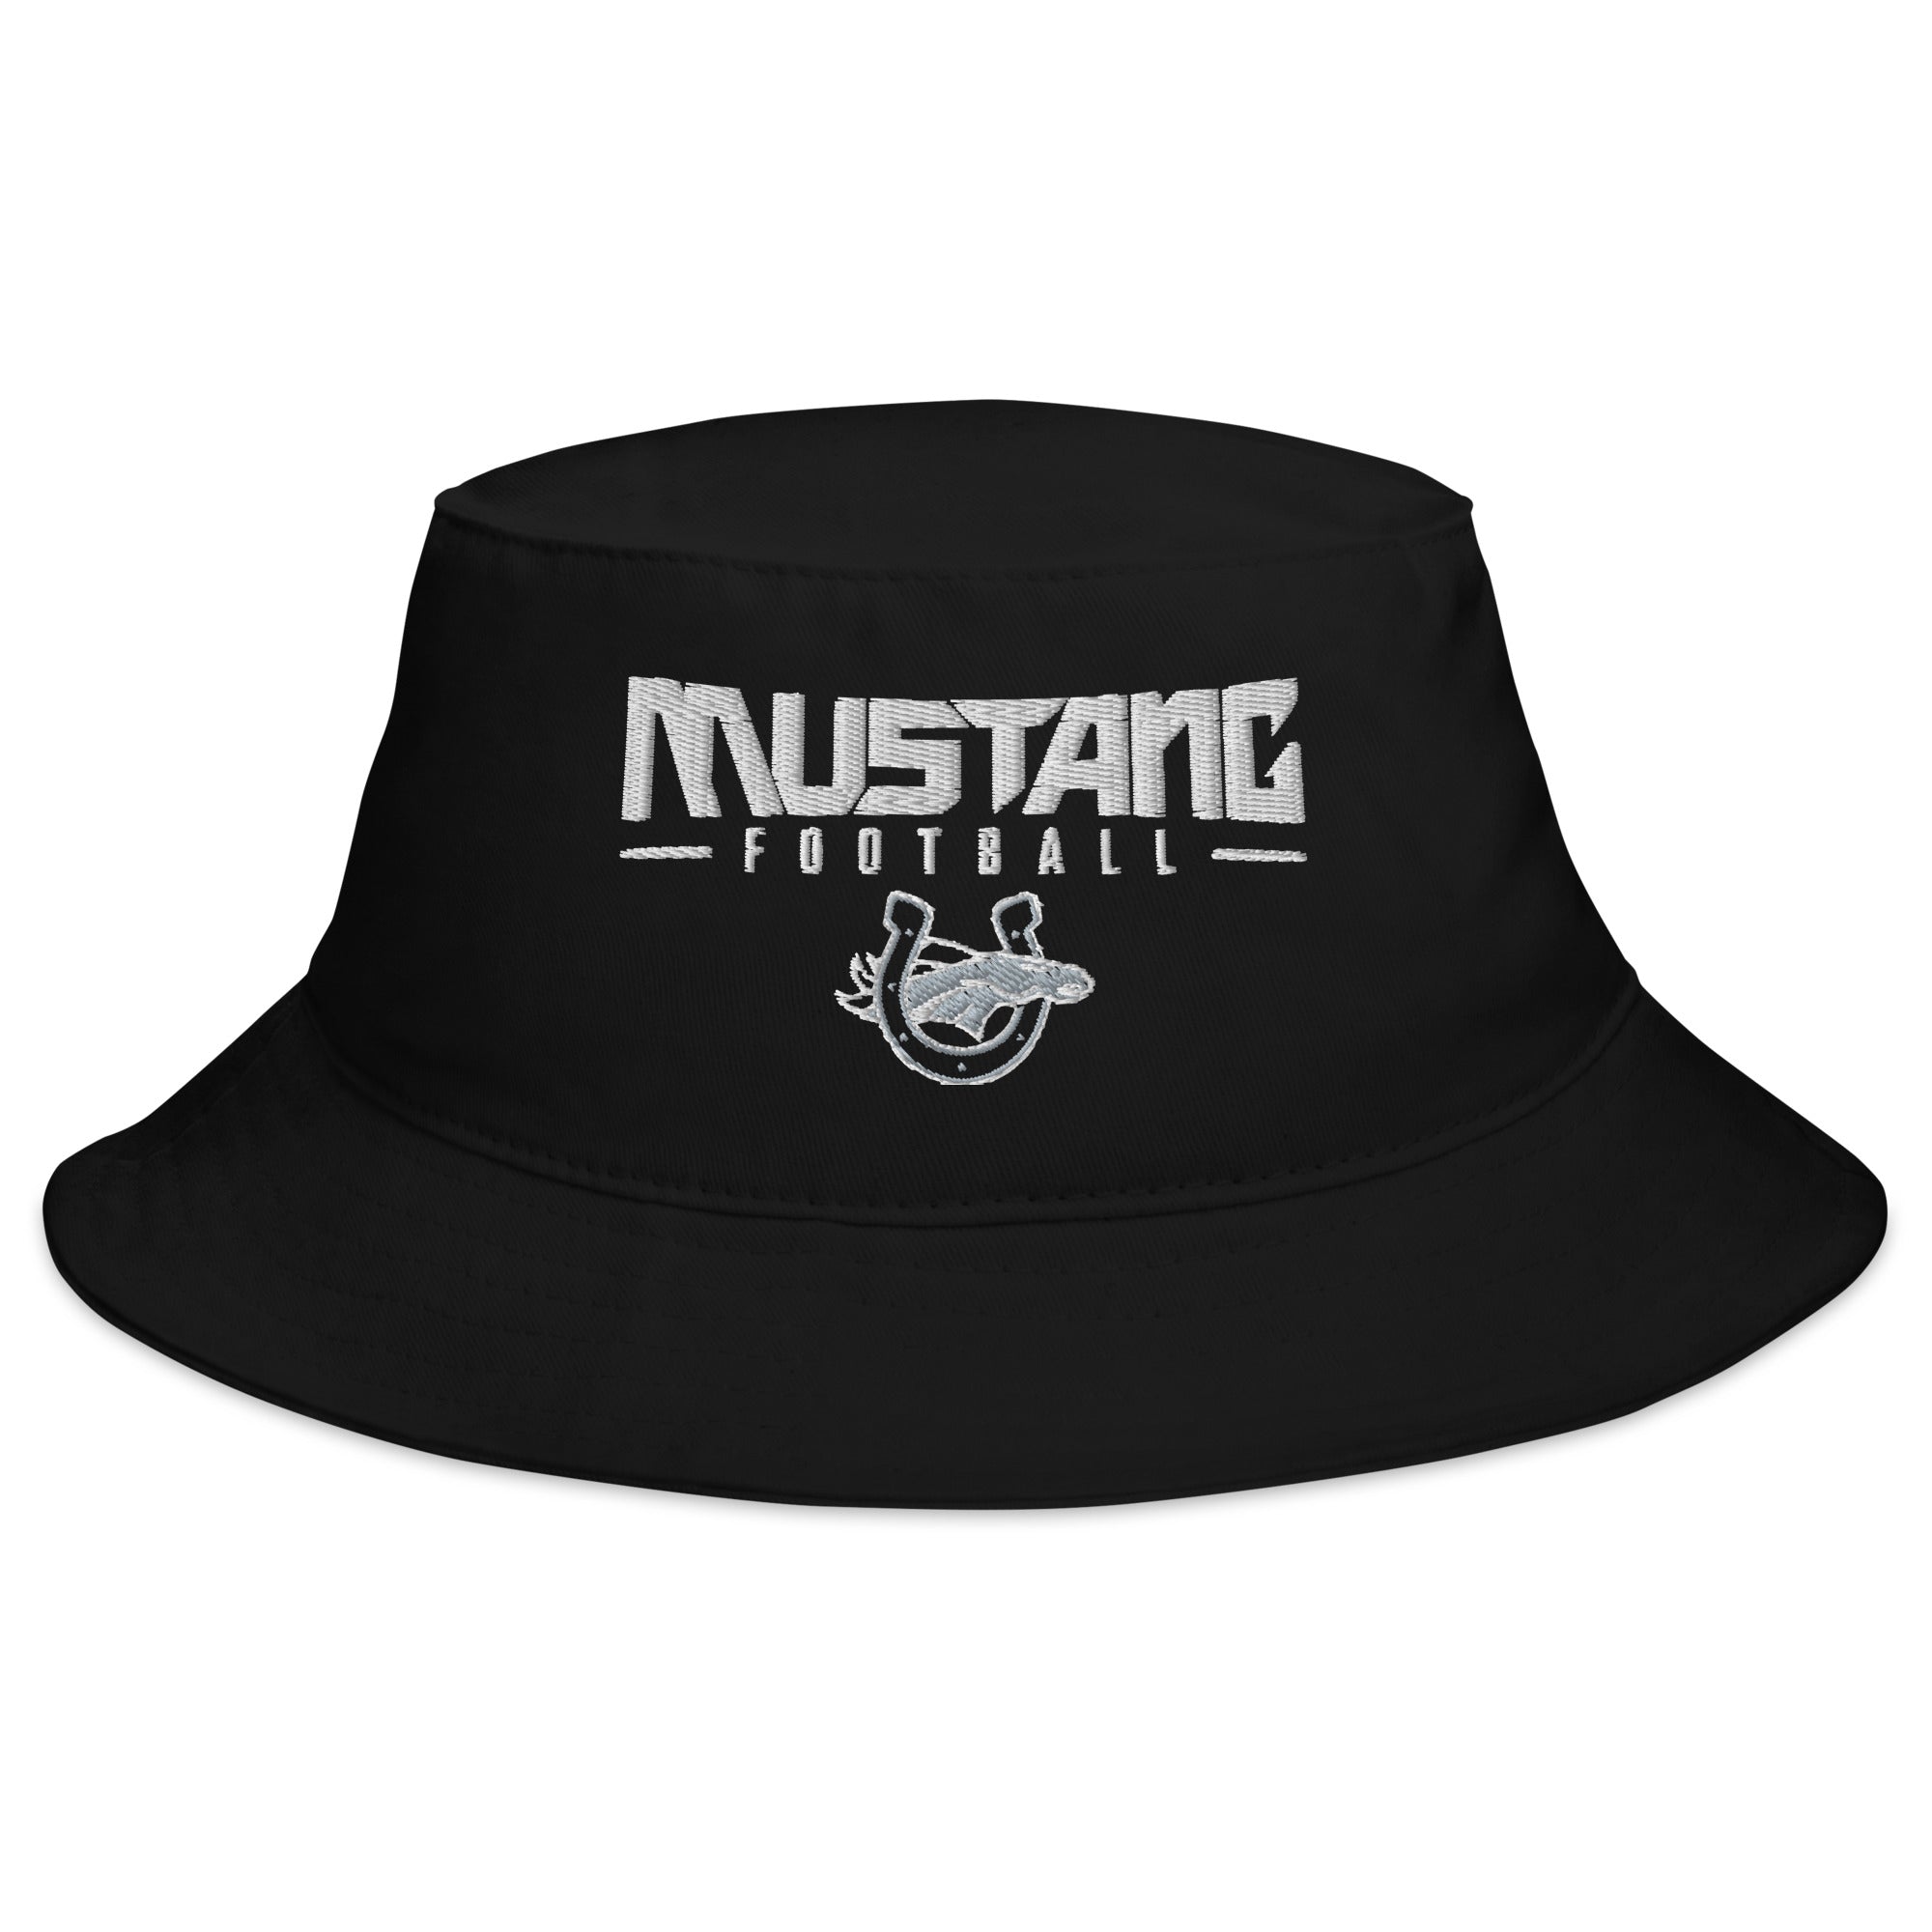 Palmetto Middle Football Bucket Hat